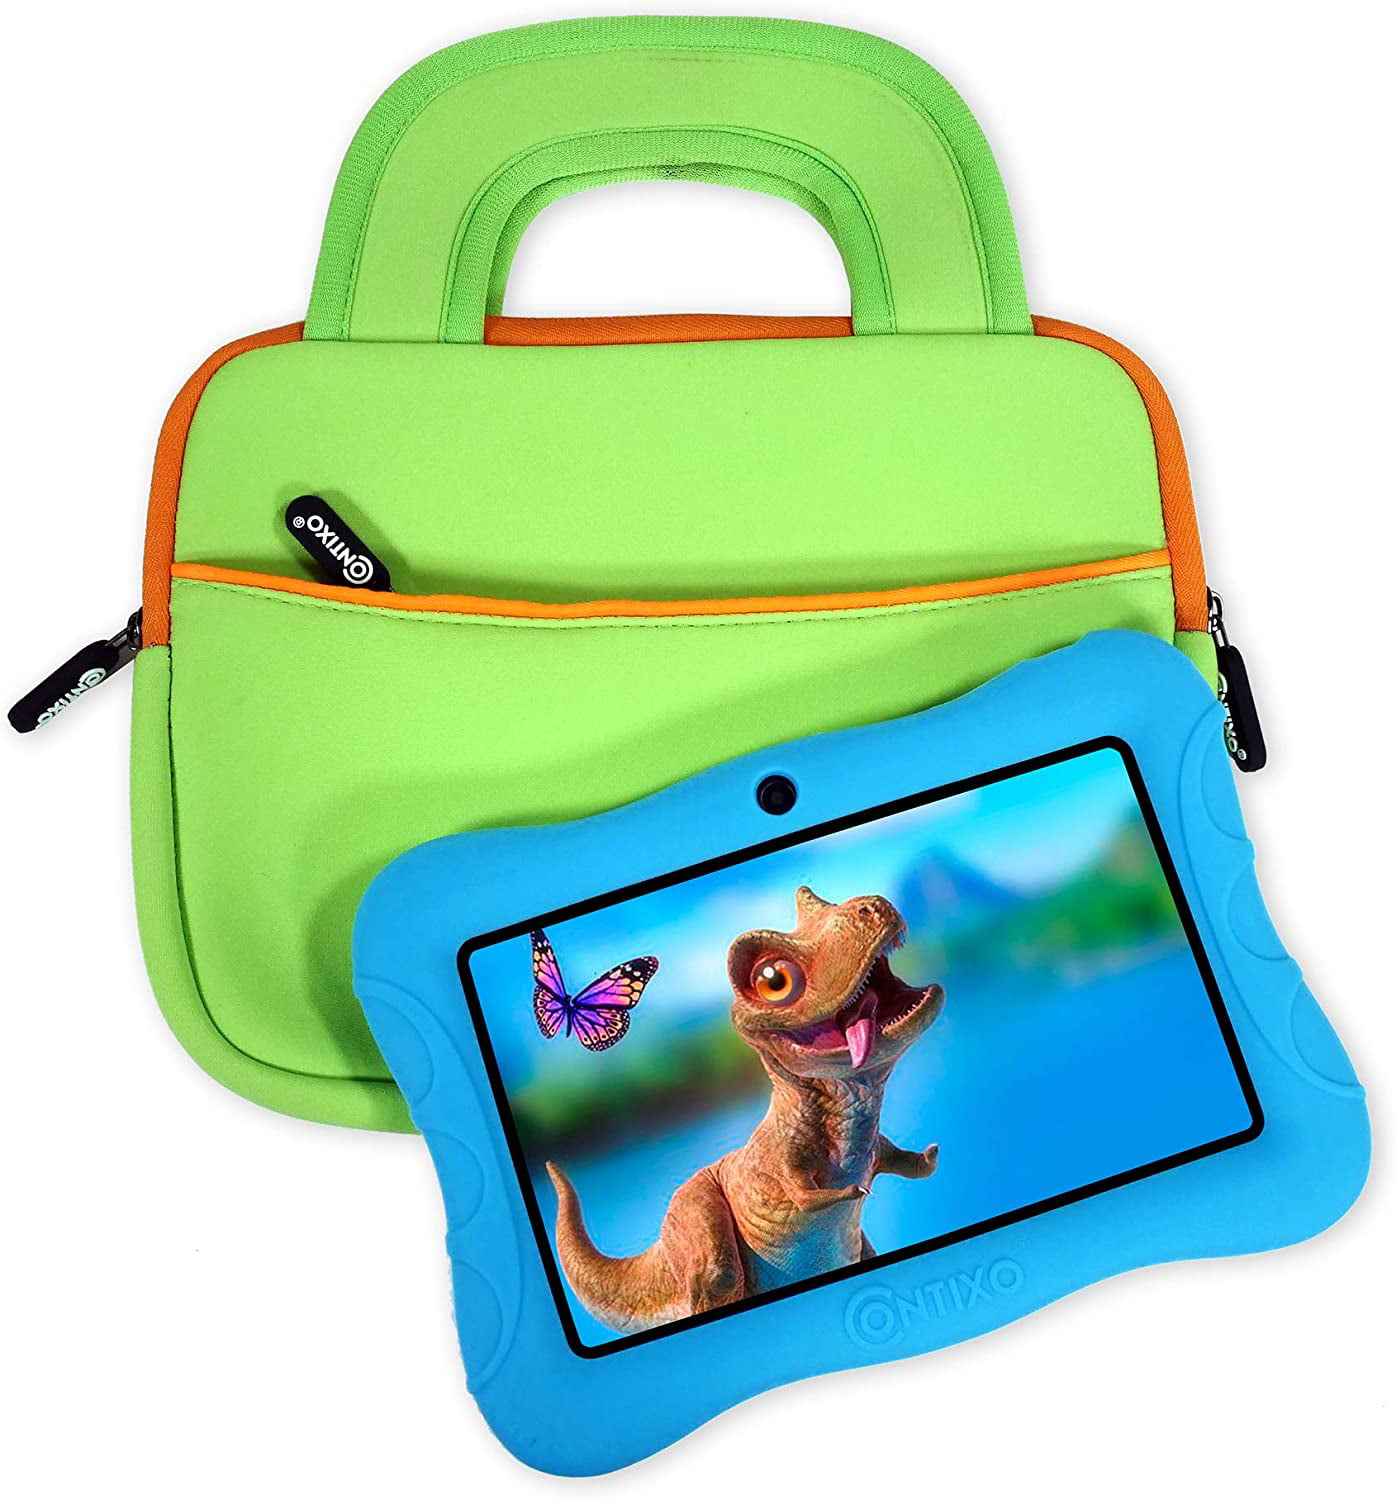 Green Contixo 10 Tablet Sleeve Bag Compatible for Contixo K101 Kids Tablet 10.1 Inch with Accessory Pocket 